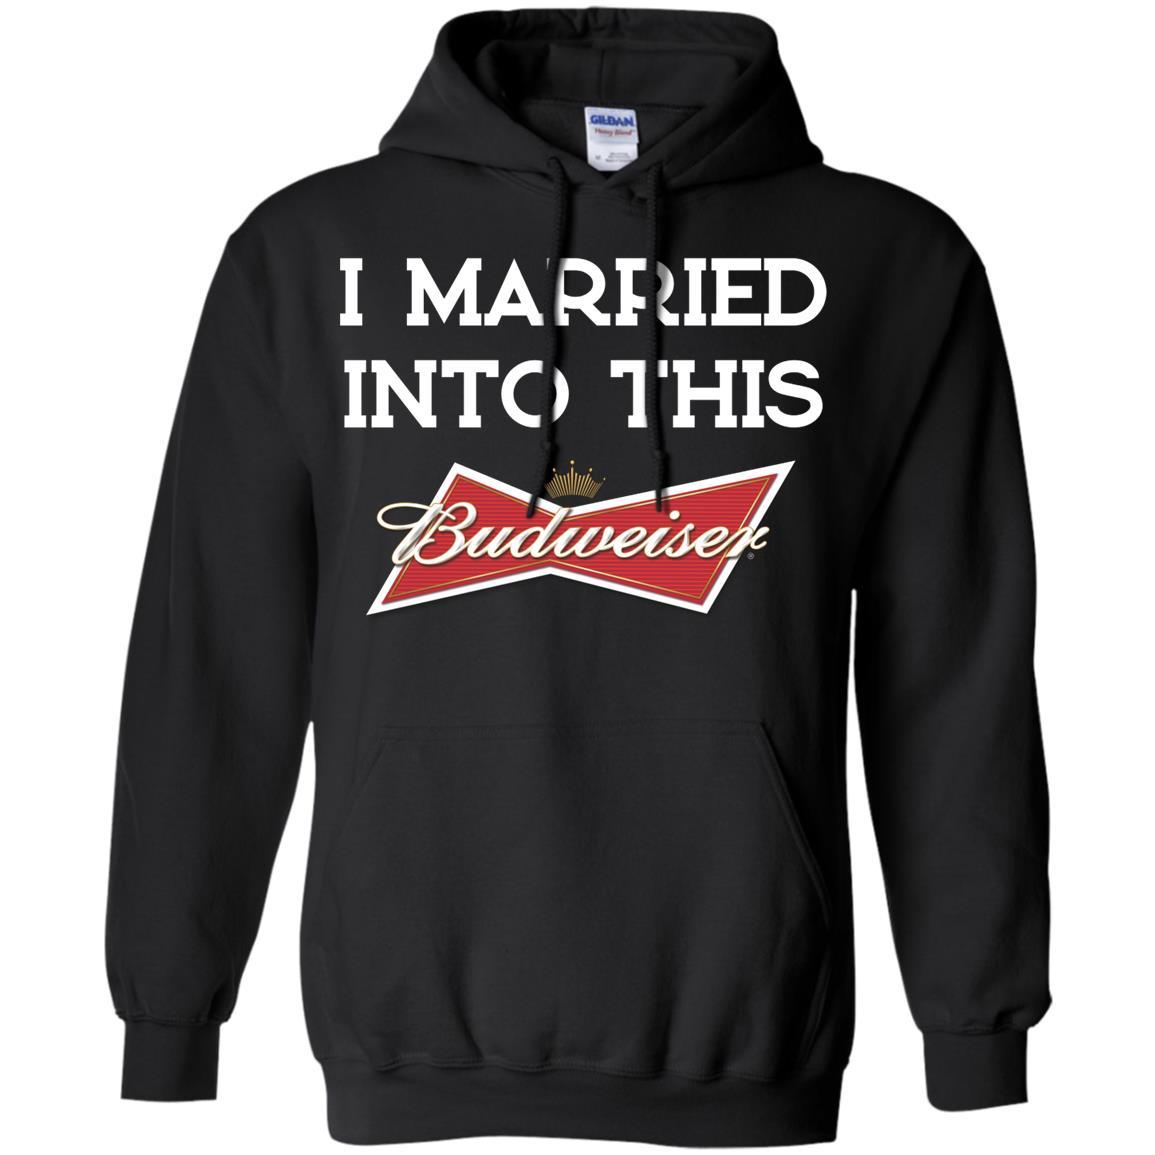 High Quality I Married Into This Budweiser Beer Shirt